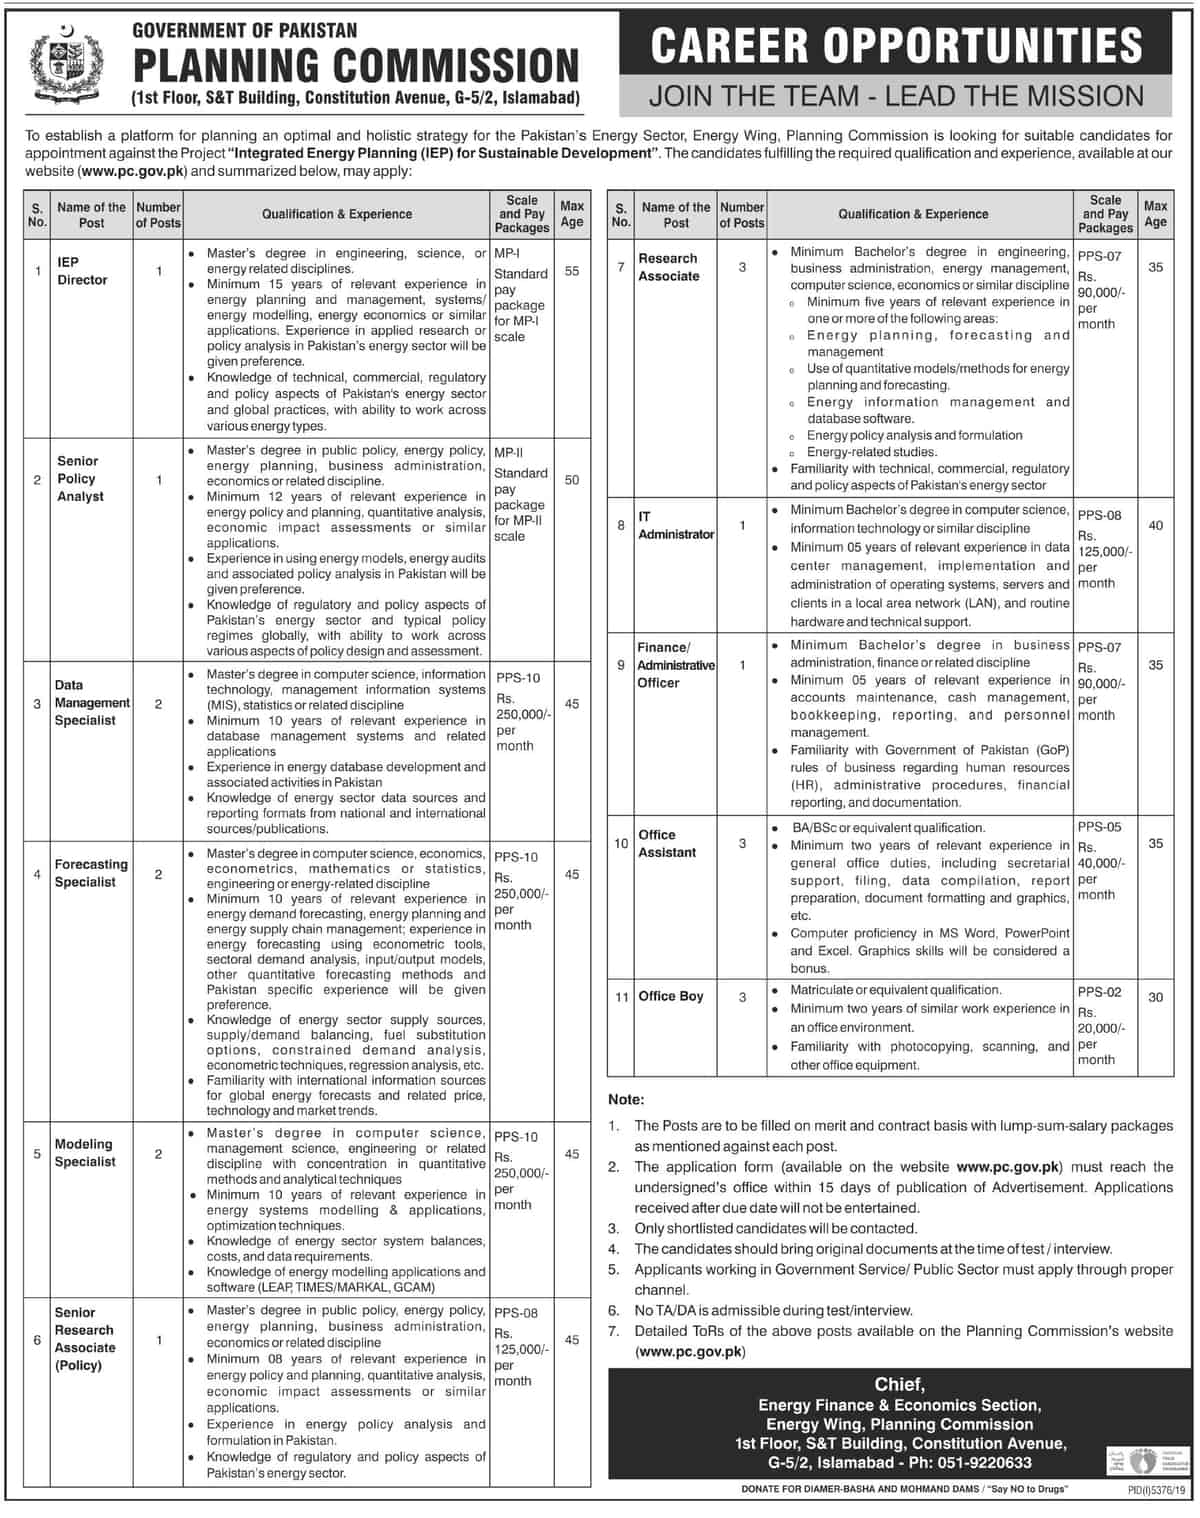 Ministry of Planning Commission Jobs 2020 Application Form www.pc.gov.pk